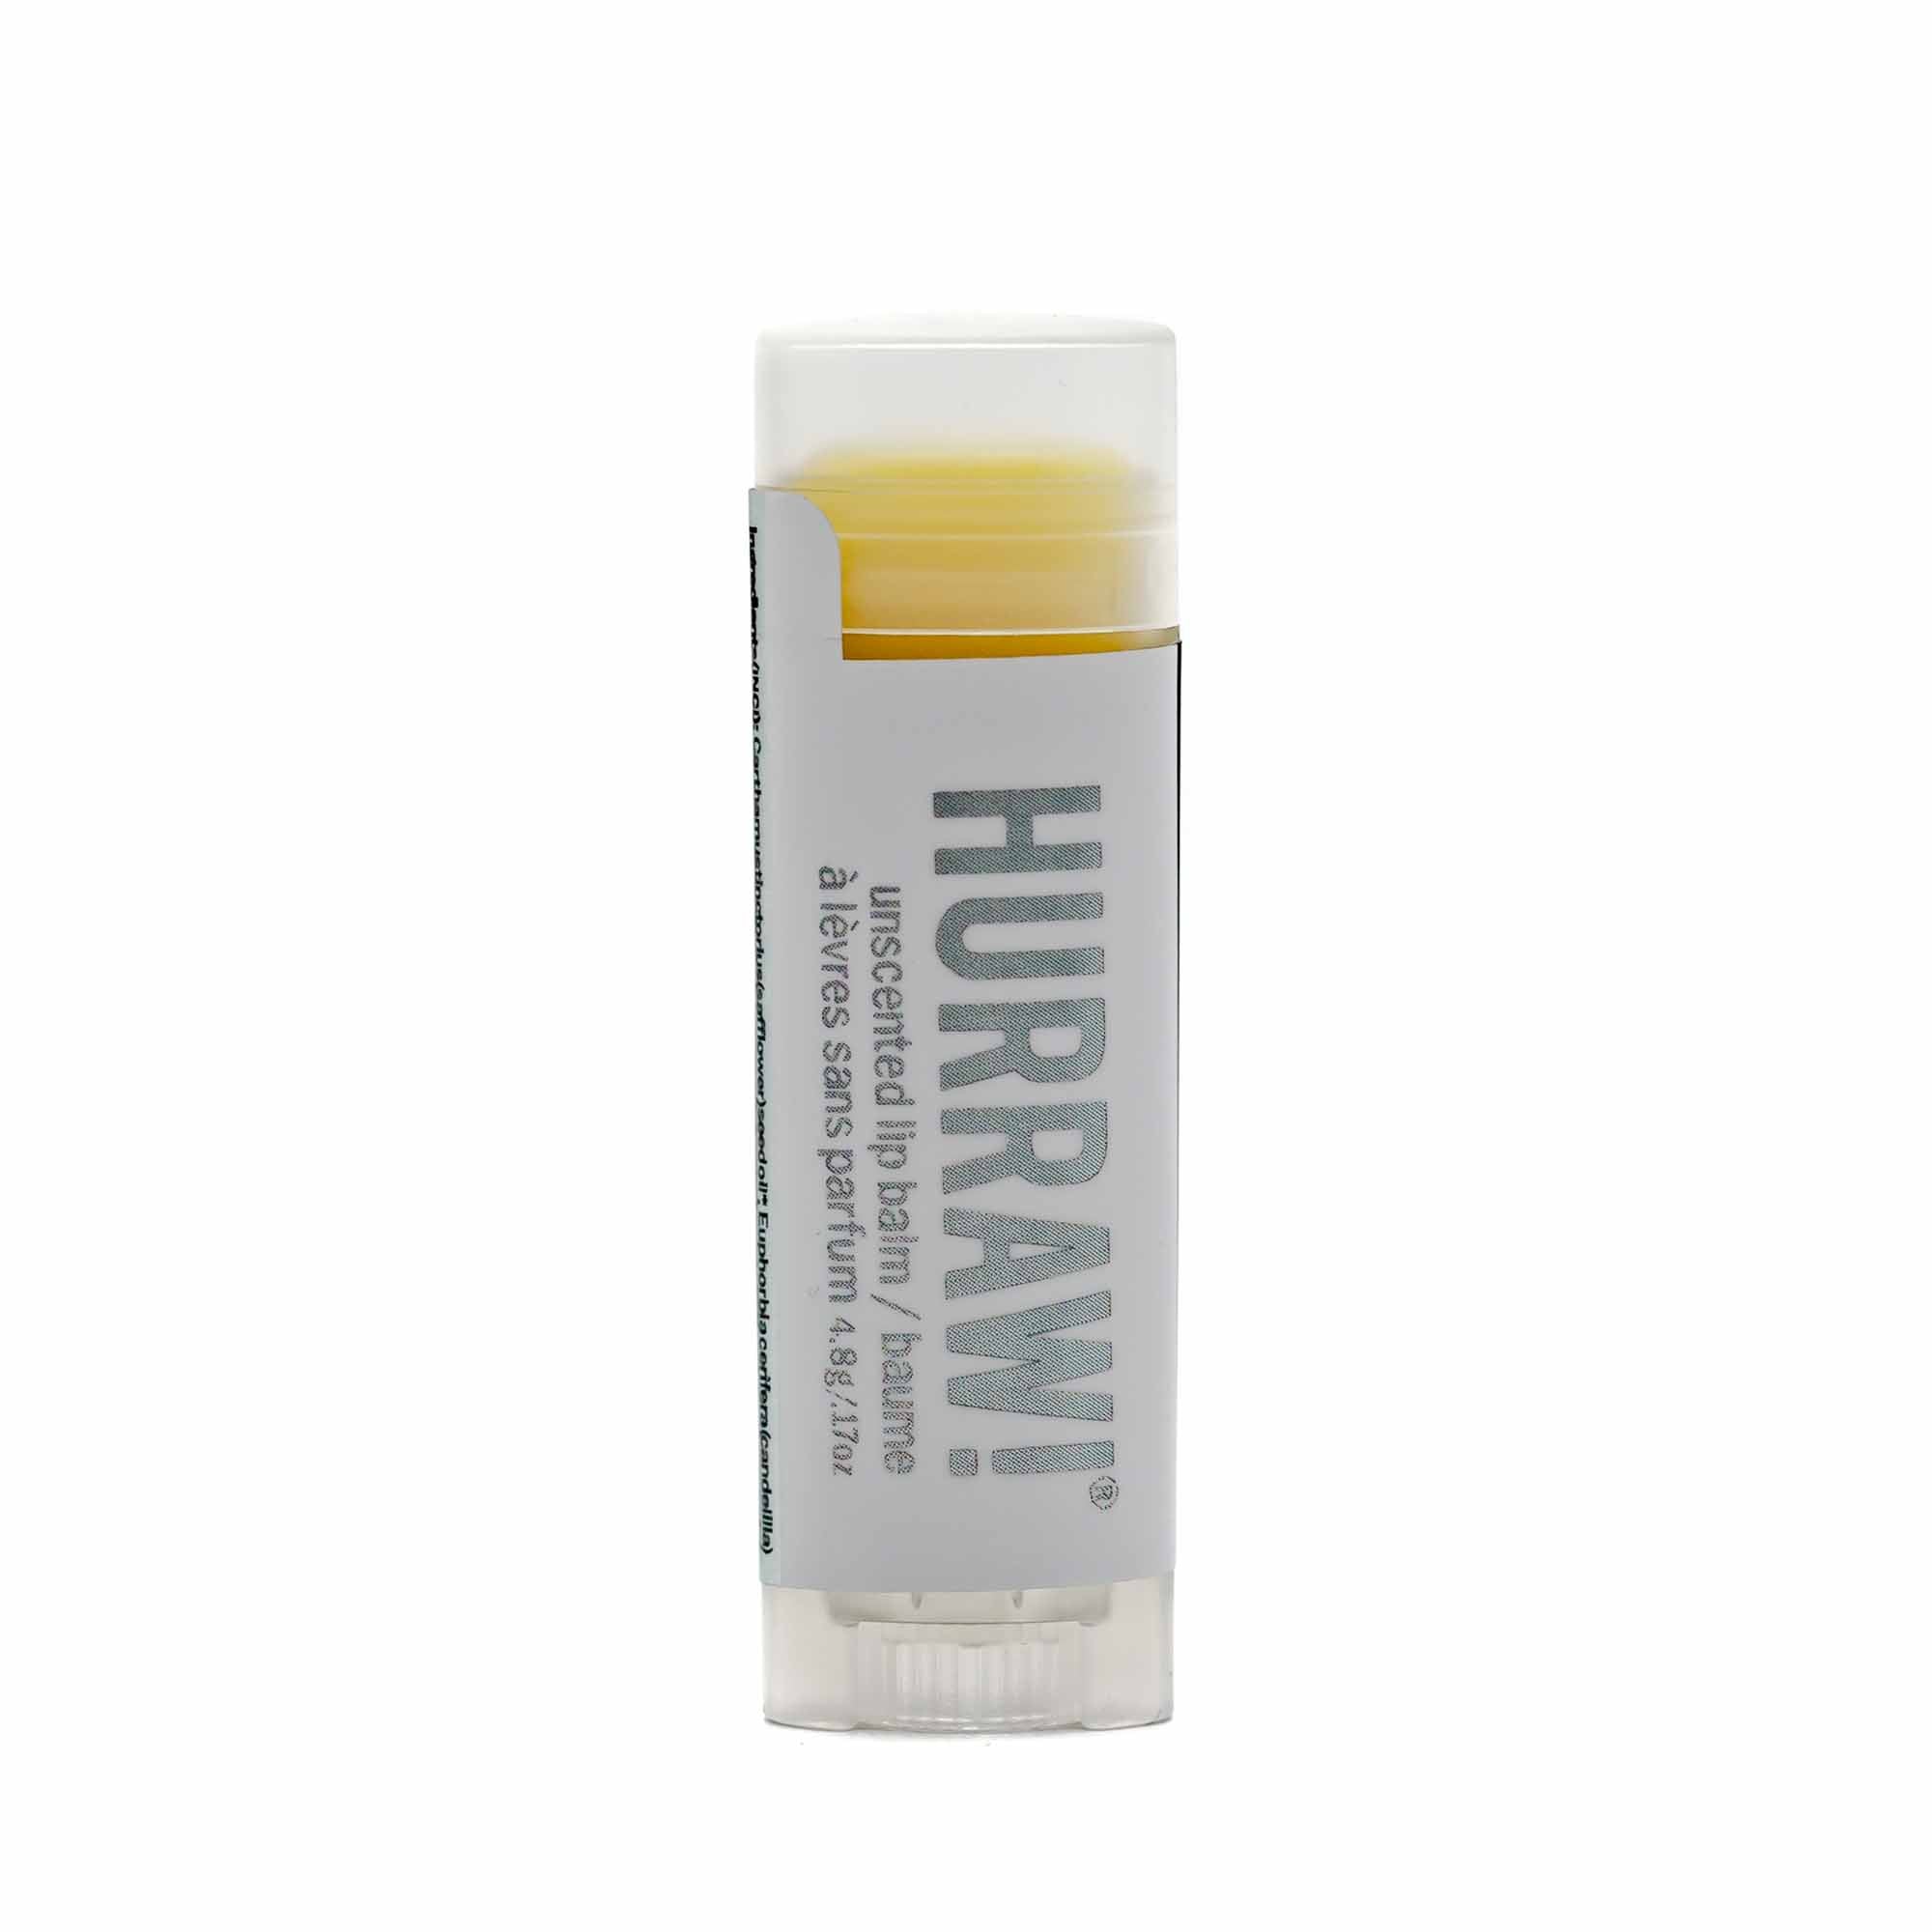 Hurraw! Lip Balm - 10 Flavours - Mortise And Tenon